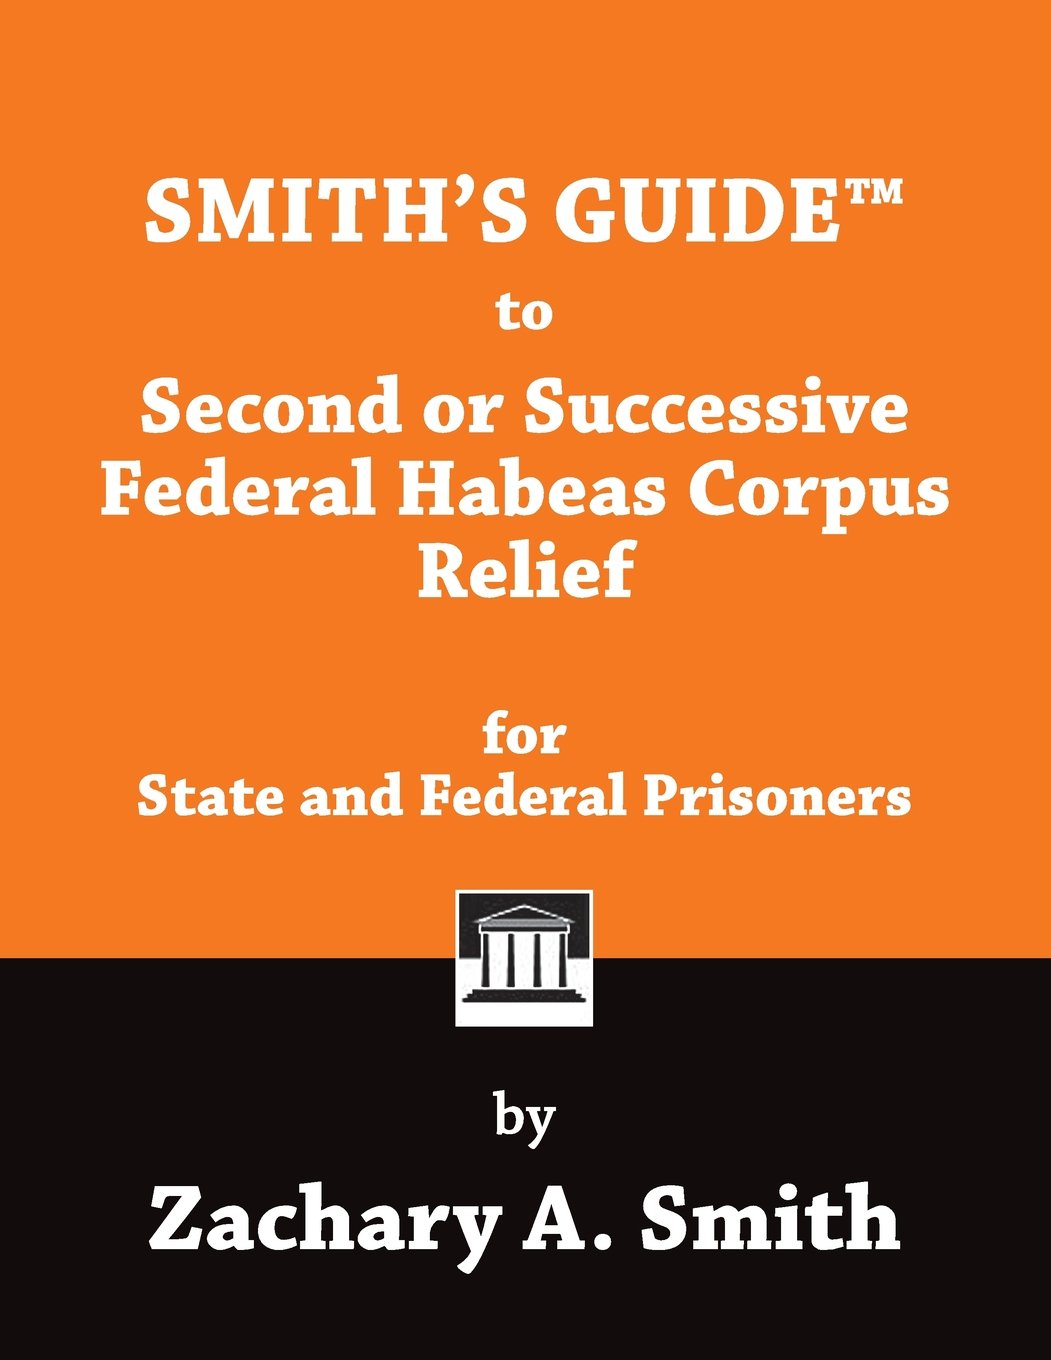 Smith's Guide to Second or Successive Federal Habeas Corpus Relief for State and Federal Prisoners - SureShot Books Publishing LLC